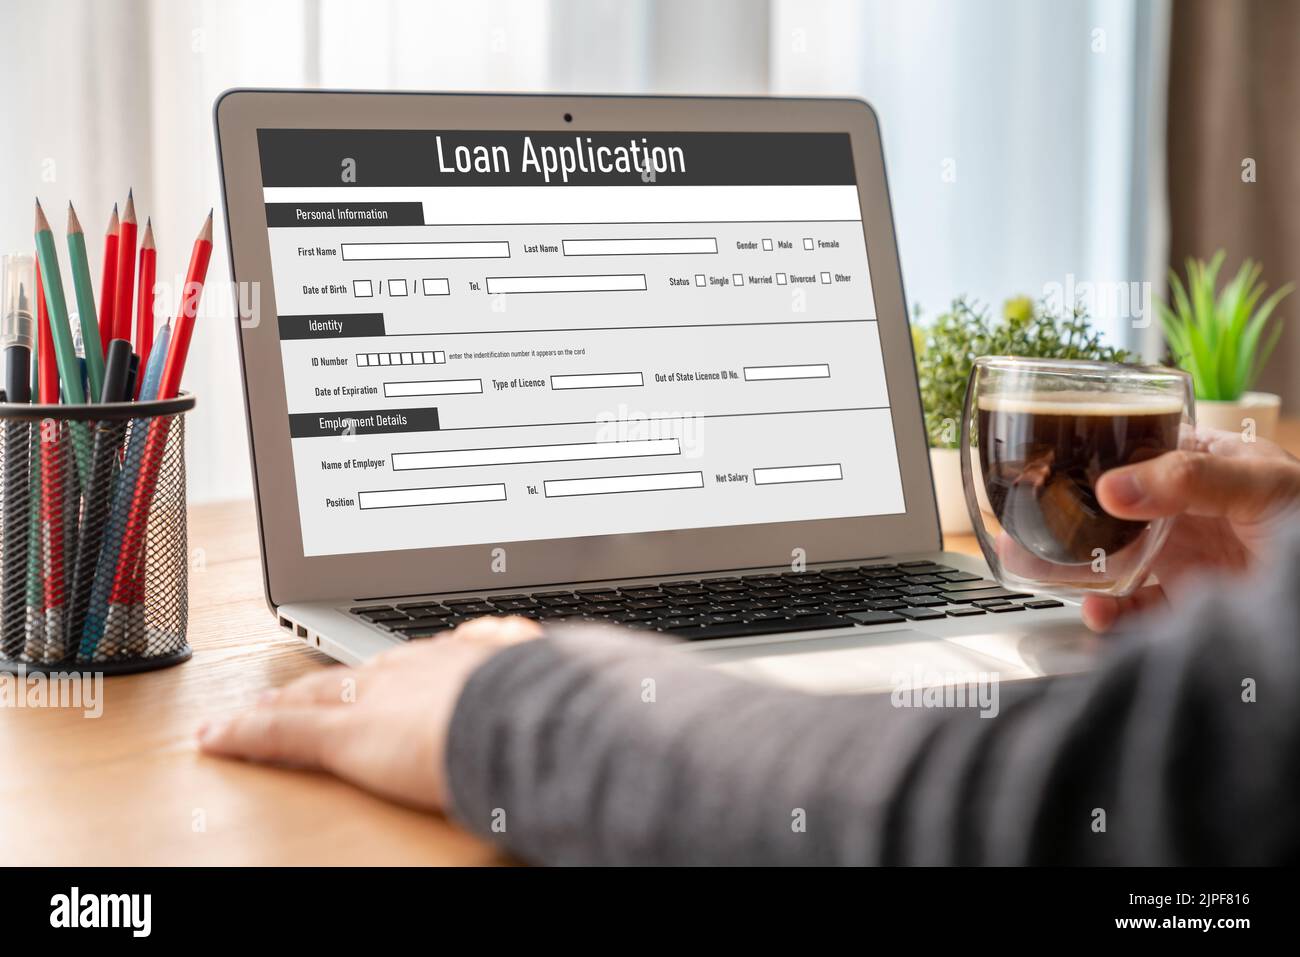 Online loan application form for modish digital information collection on the internet network Stock Photo